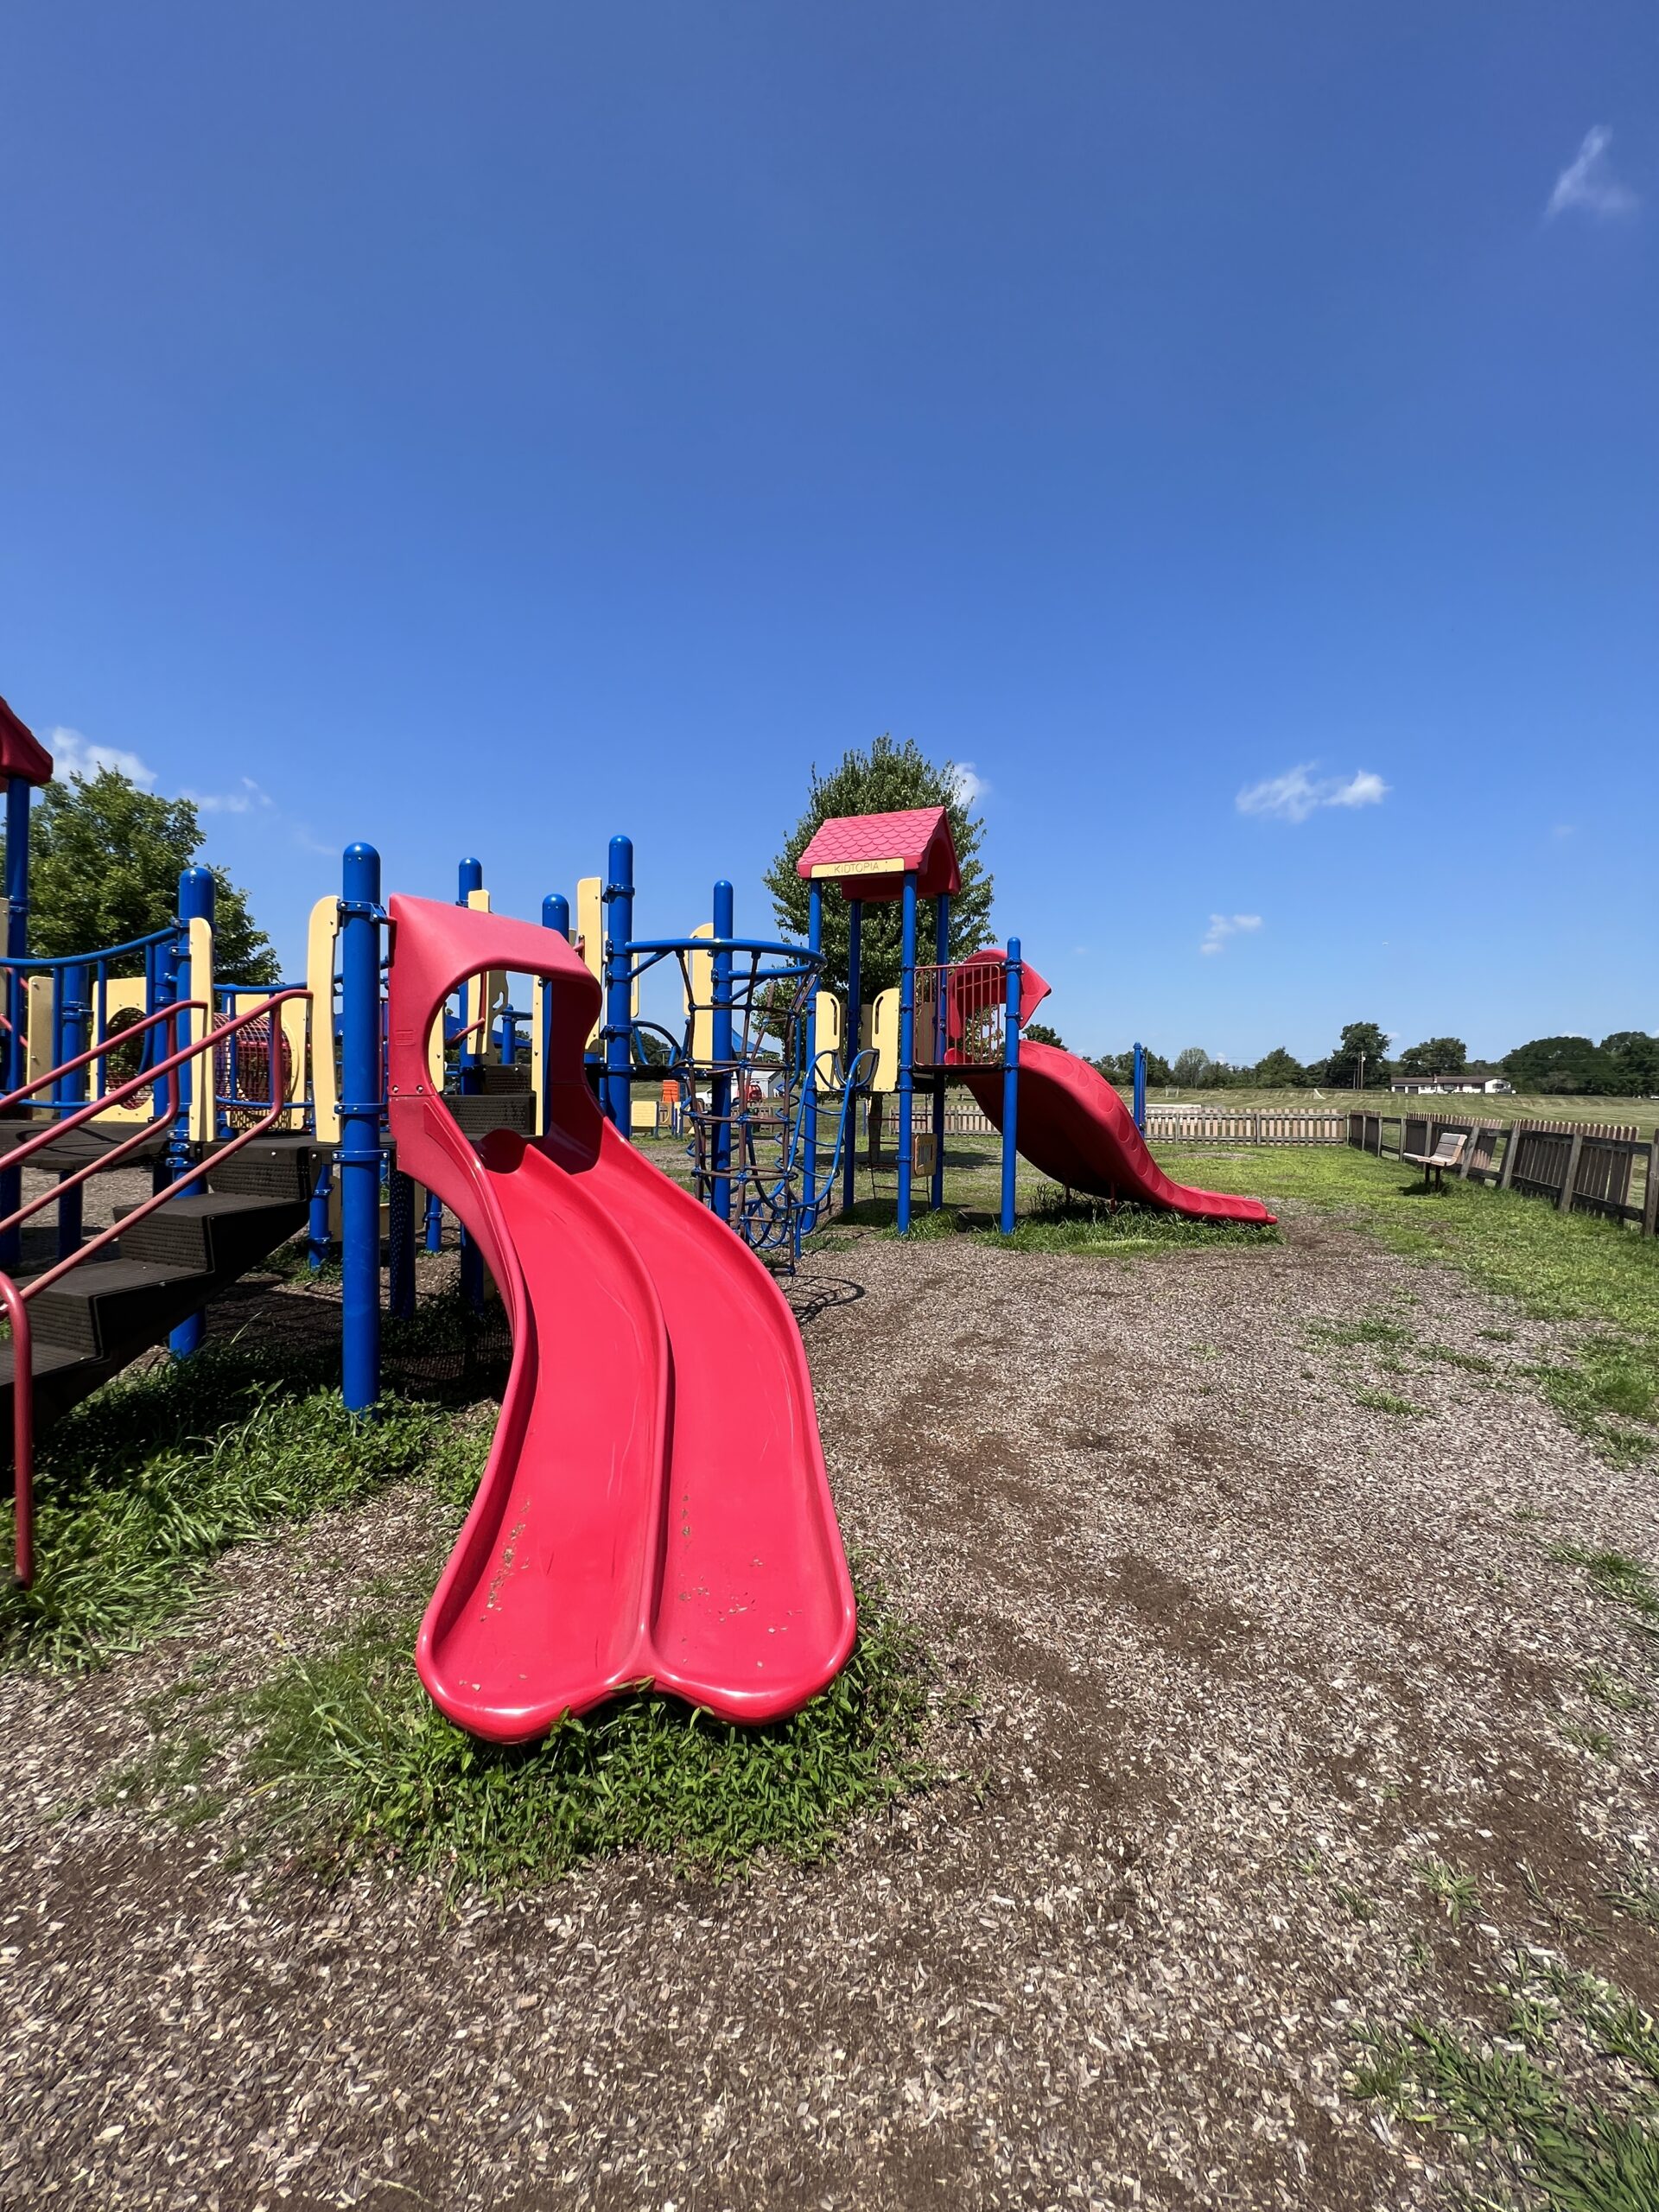 Alexandria Township Park Playground in Milford NJ - SLIDES - curvy side by side slides TALL image